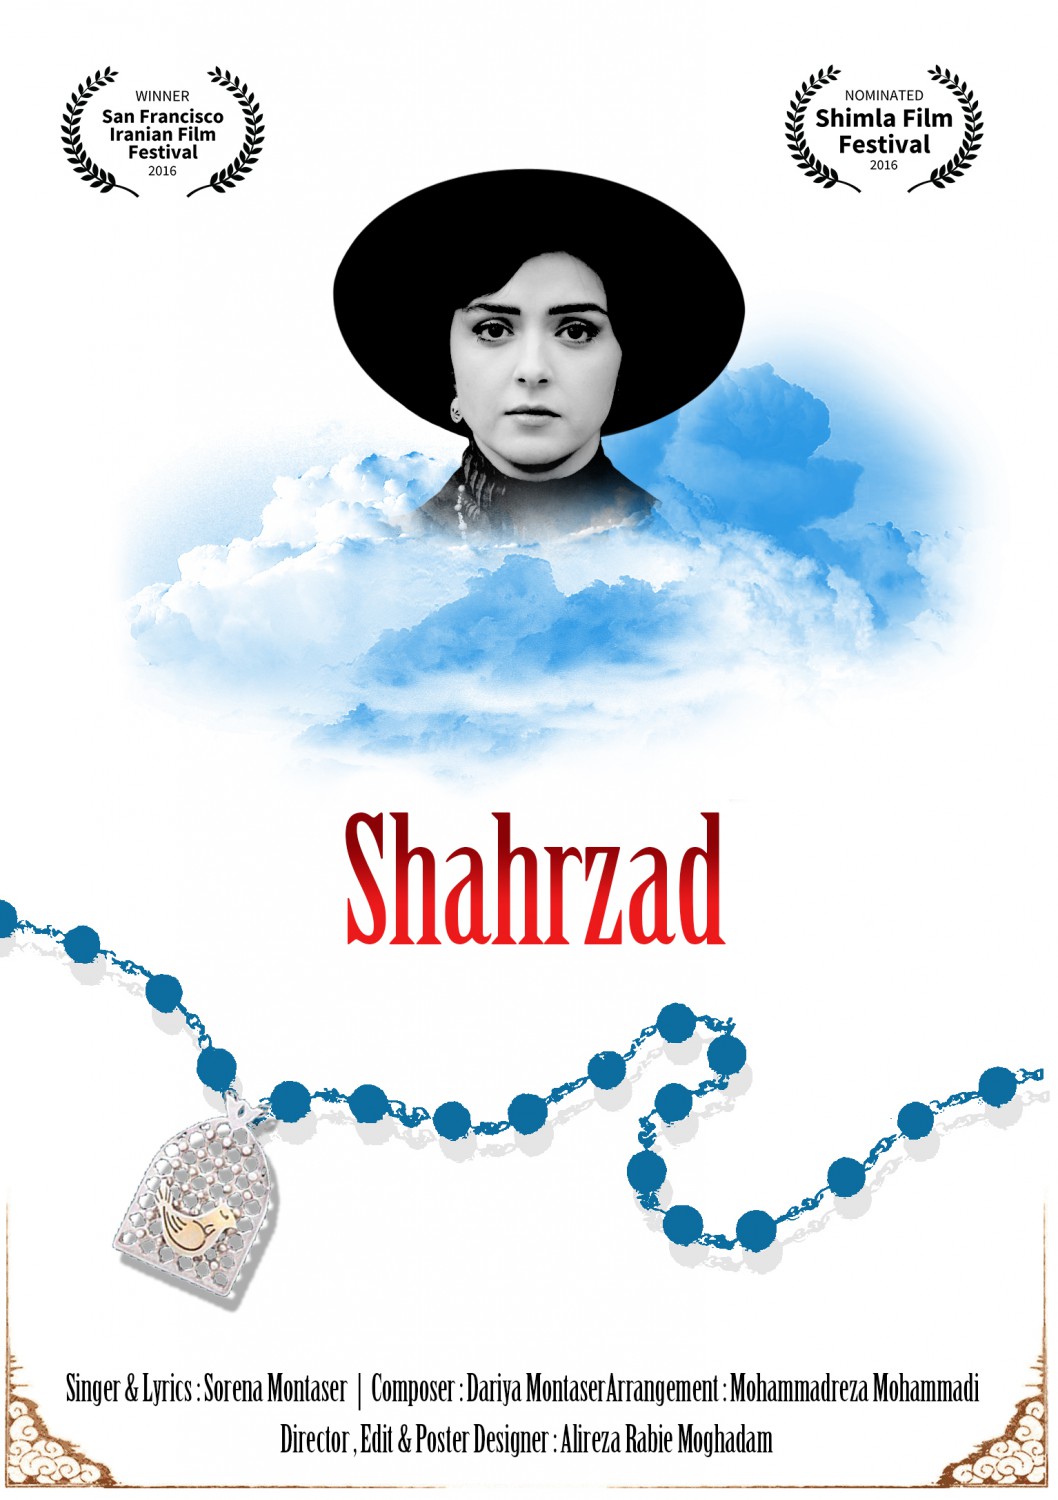 Extra Large Movie Poster Image for Shahrzad